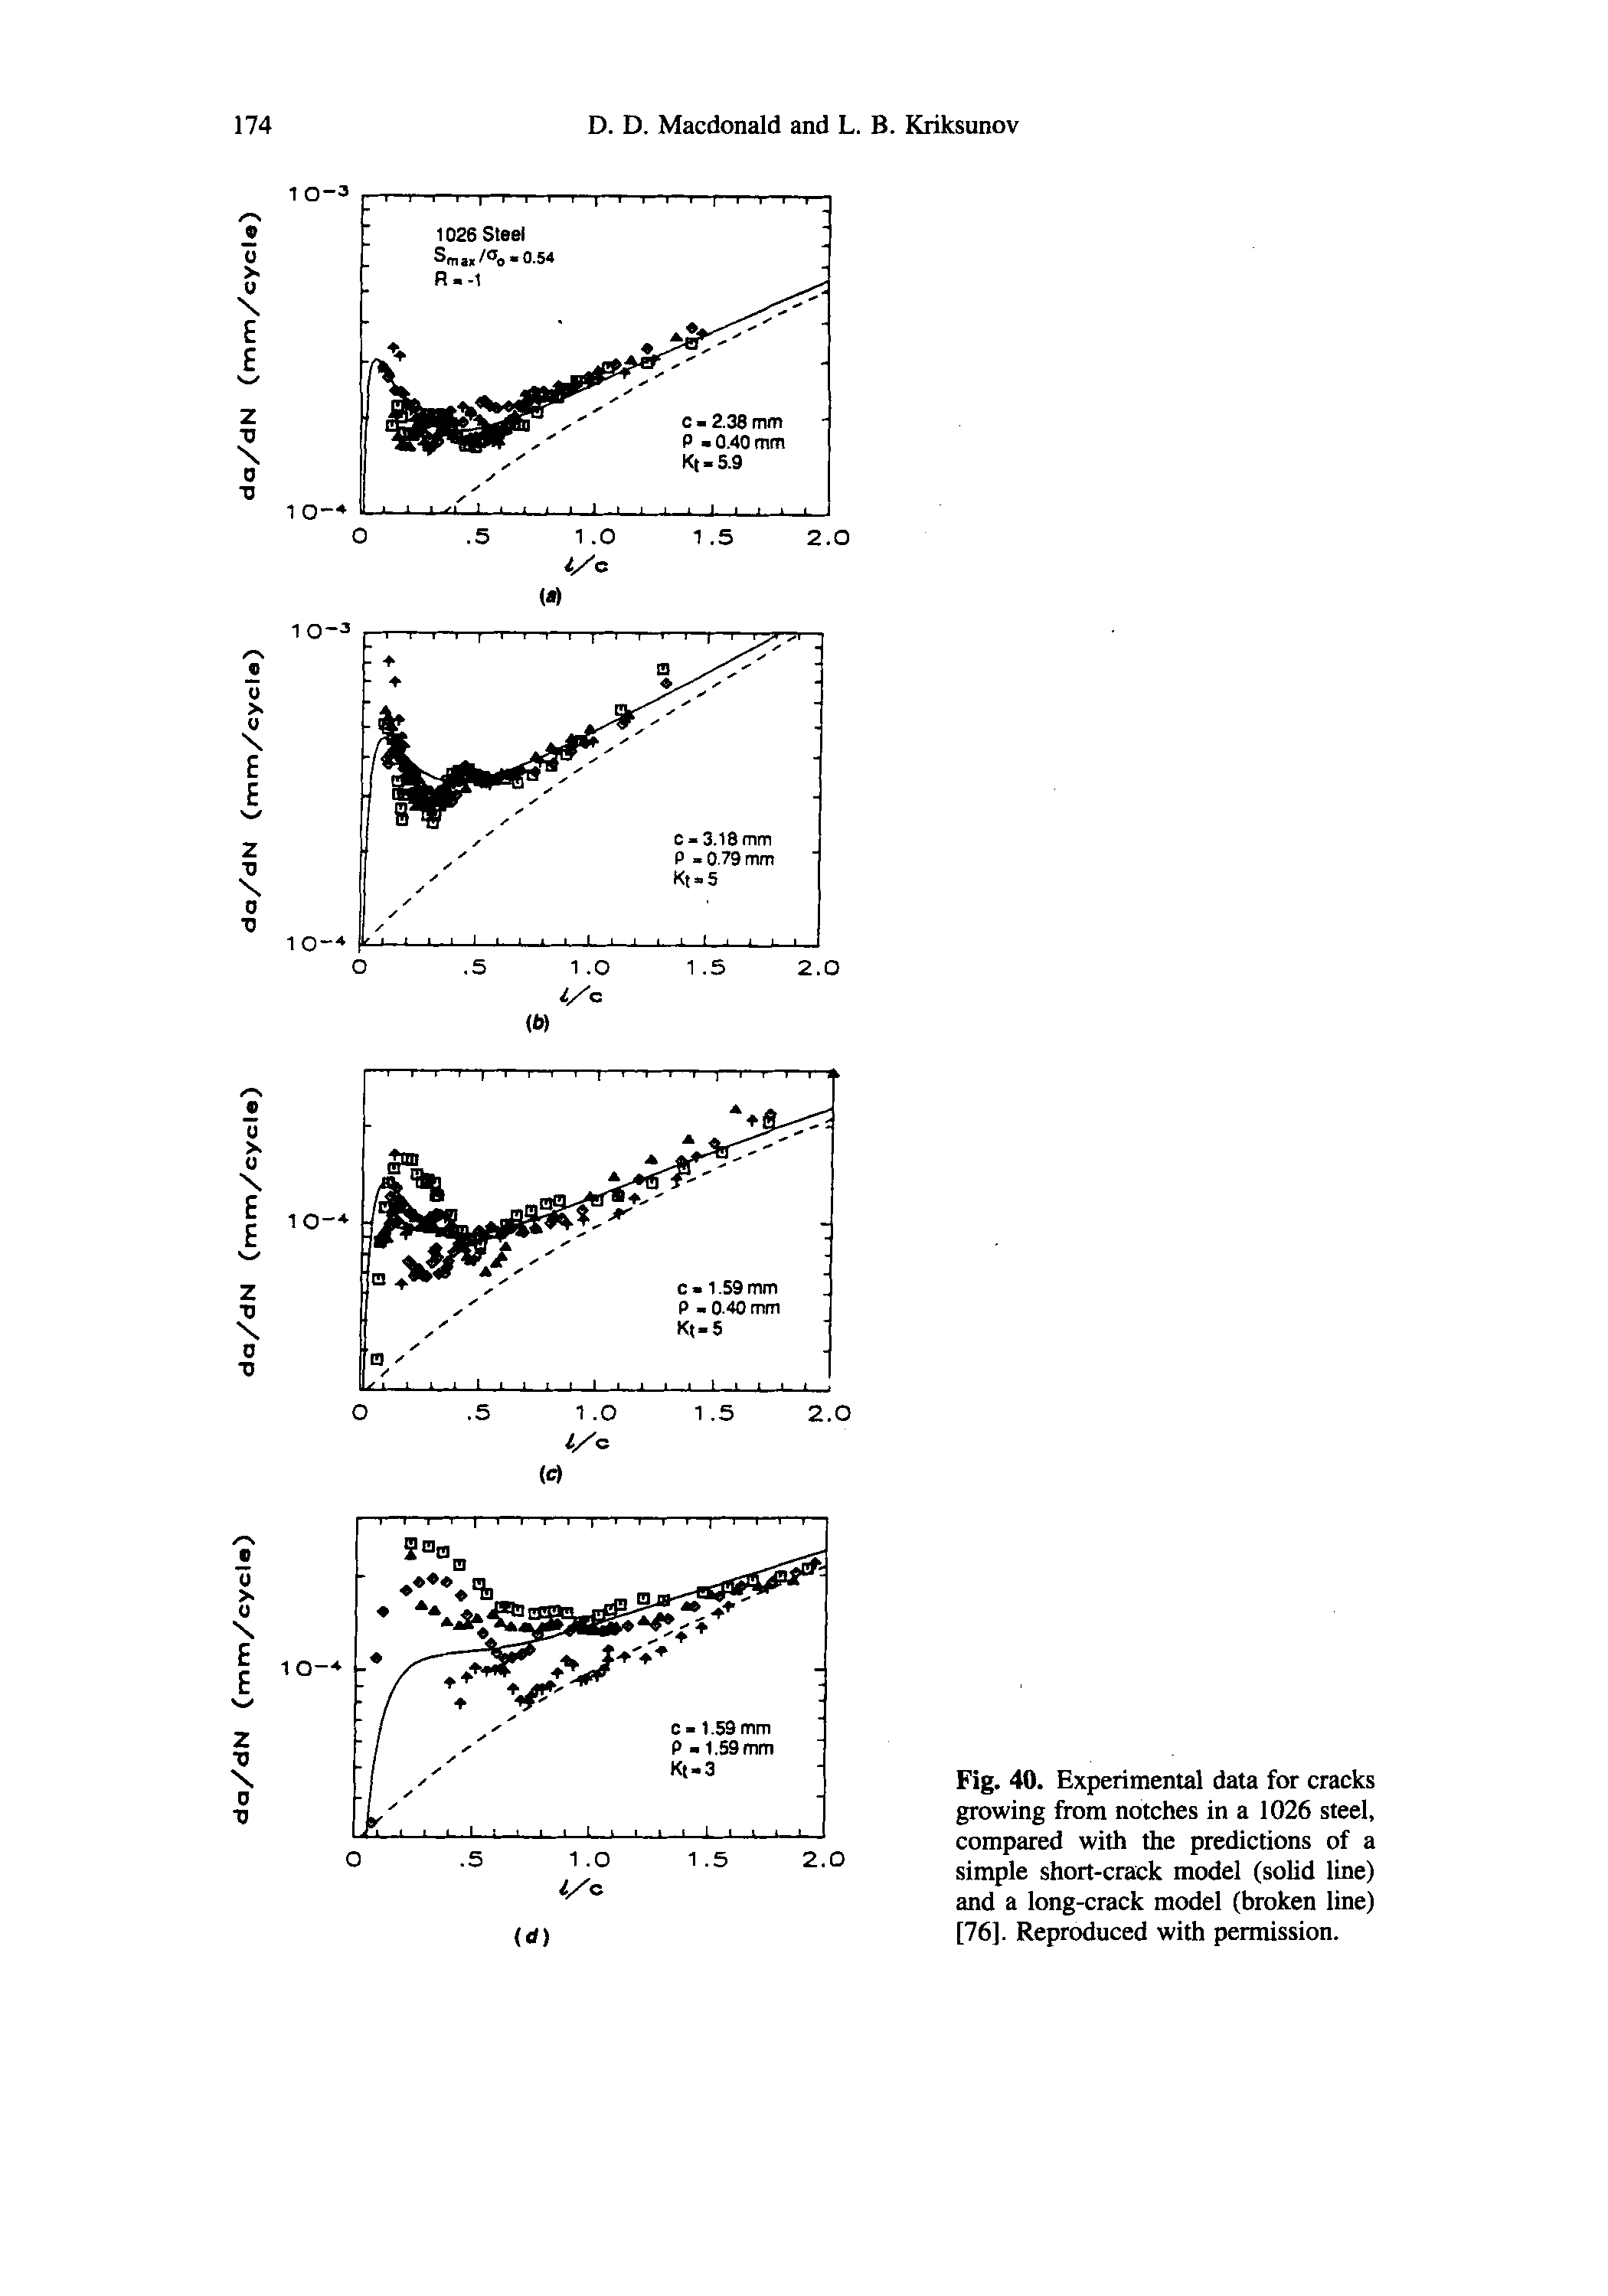 Fig. 40. Experimental data for cracks growing from notches in a 1026 steel, compared with the predictions of a simple short-crack model (solid line) and a long-crack model (broken line) [76]. Reproduced with permission.